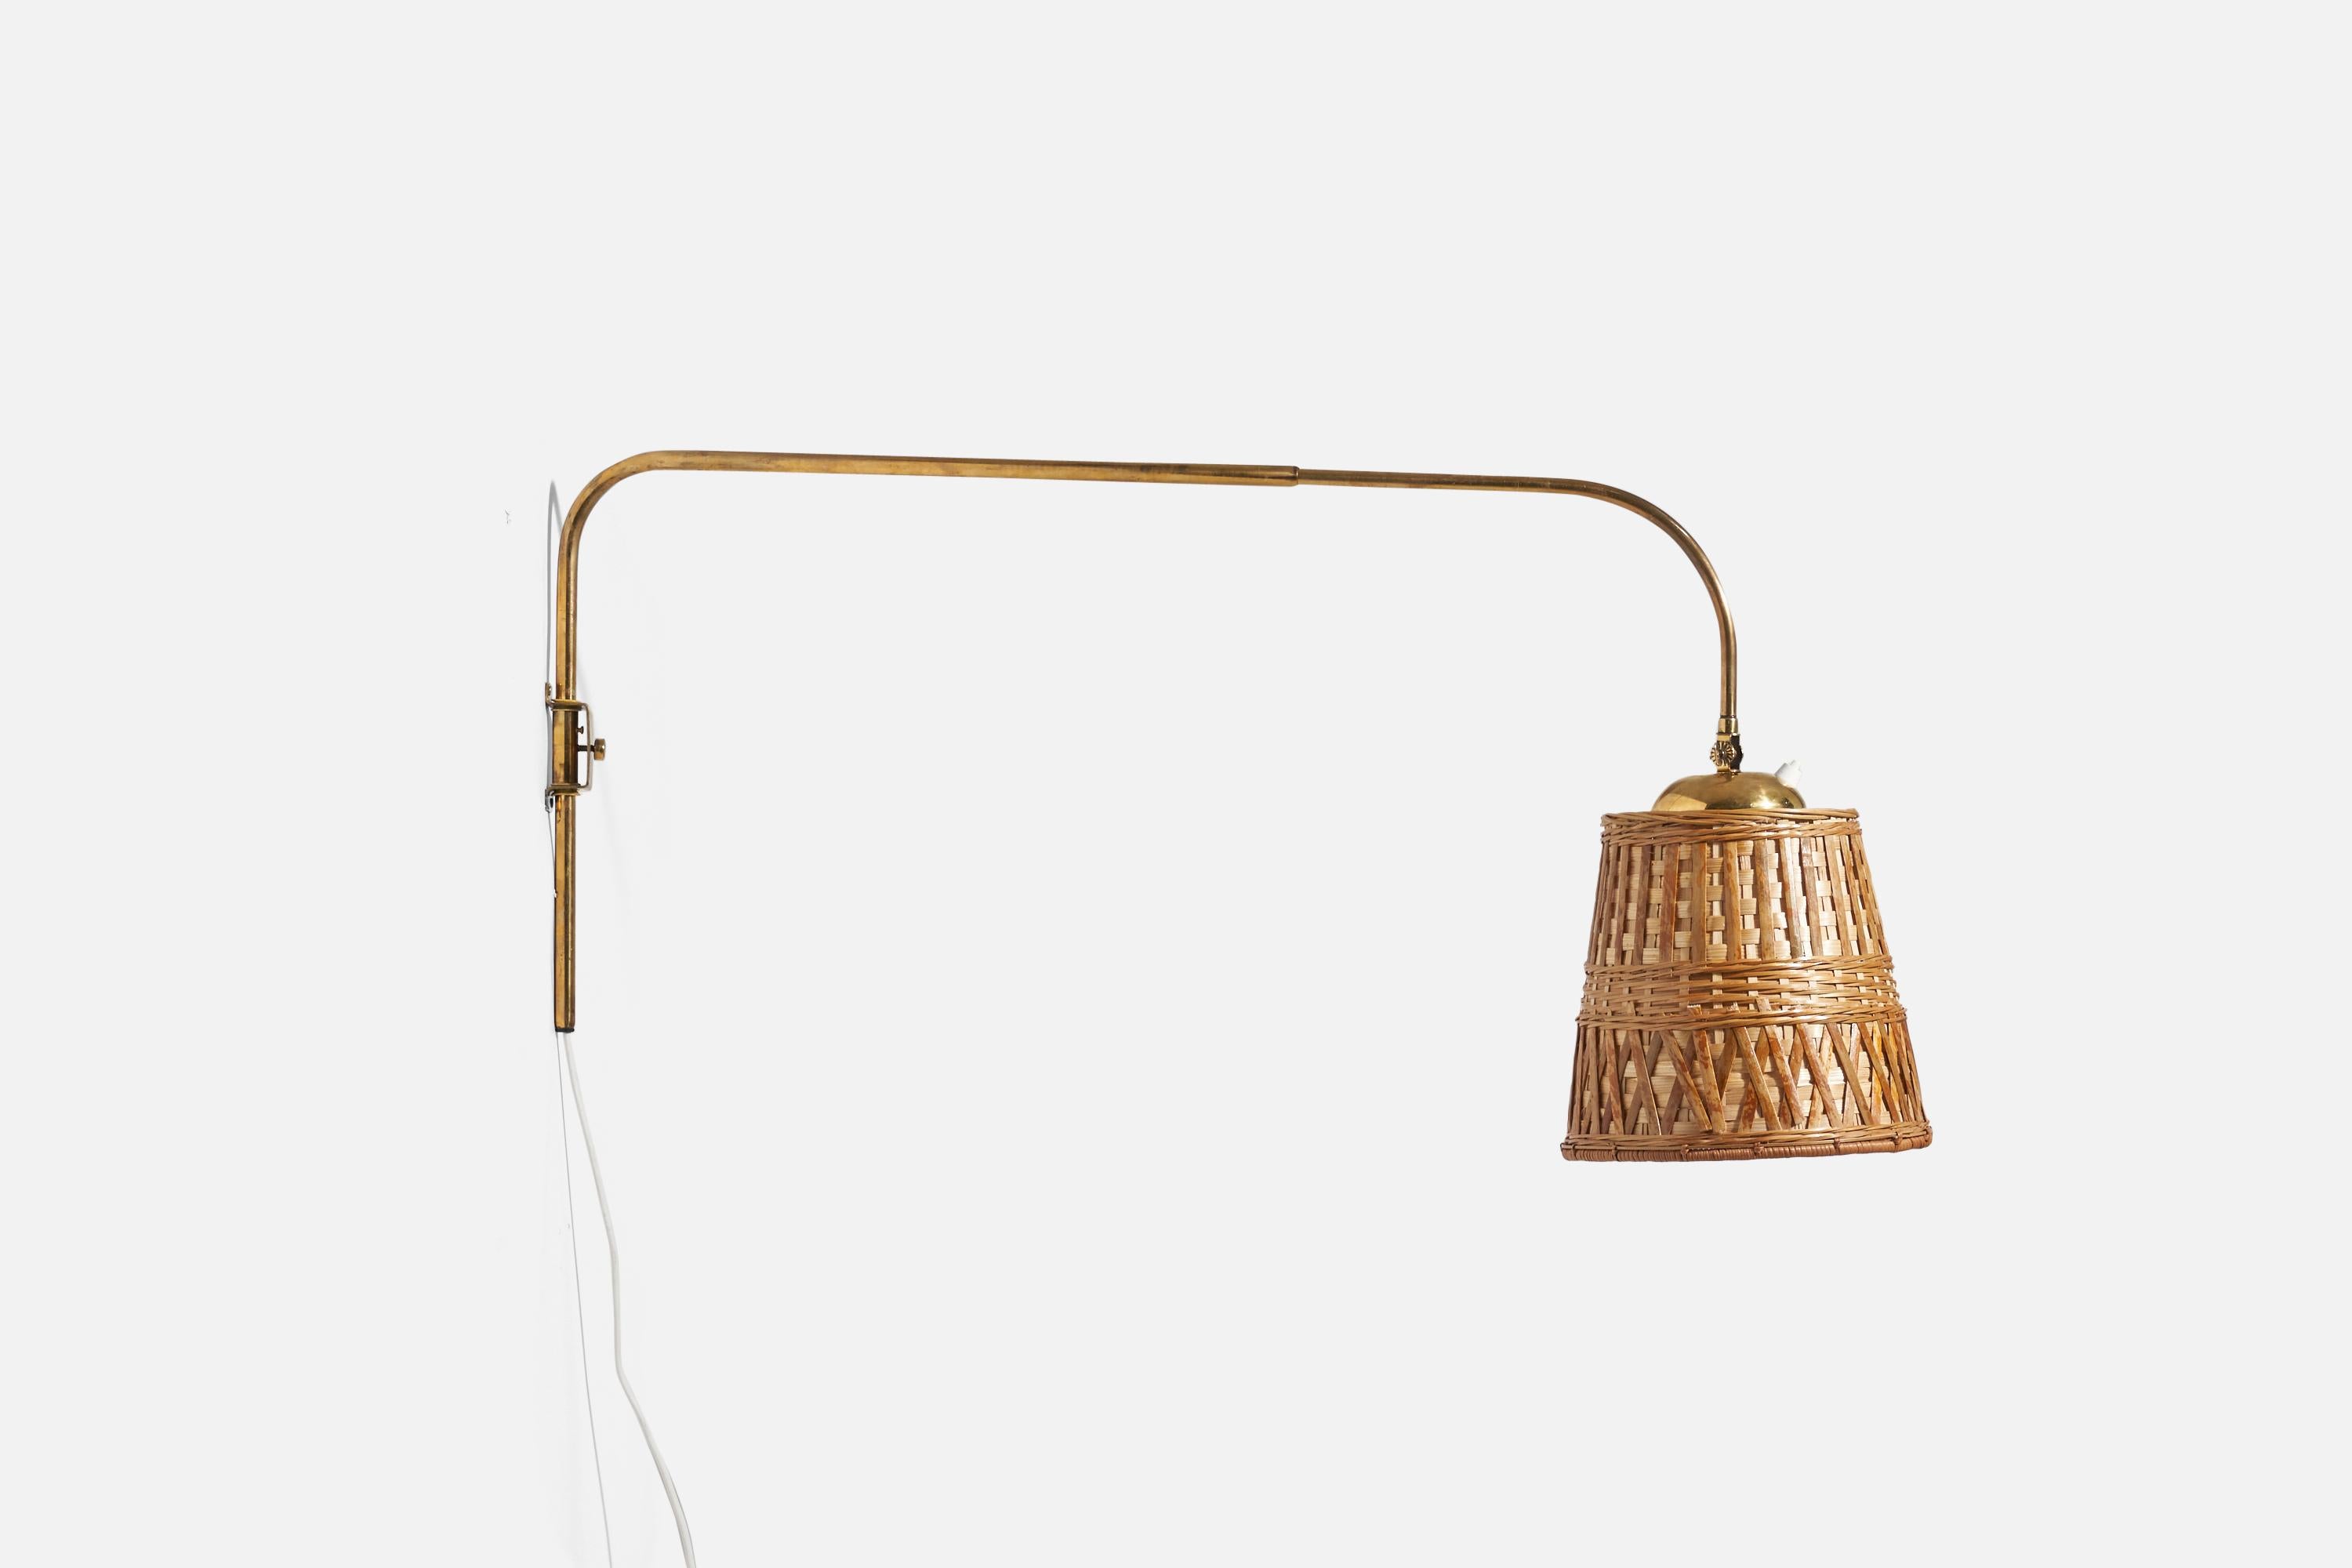 A brass and rattan wall light designed and produced by Valinte OY, Finland, 1950s. 

Dimensions variable, measured as illustrated in first image.

Sold with Lampshade. Dimensions stated are of Sconce with Lampshade.

Socket takes standard E-26